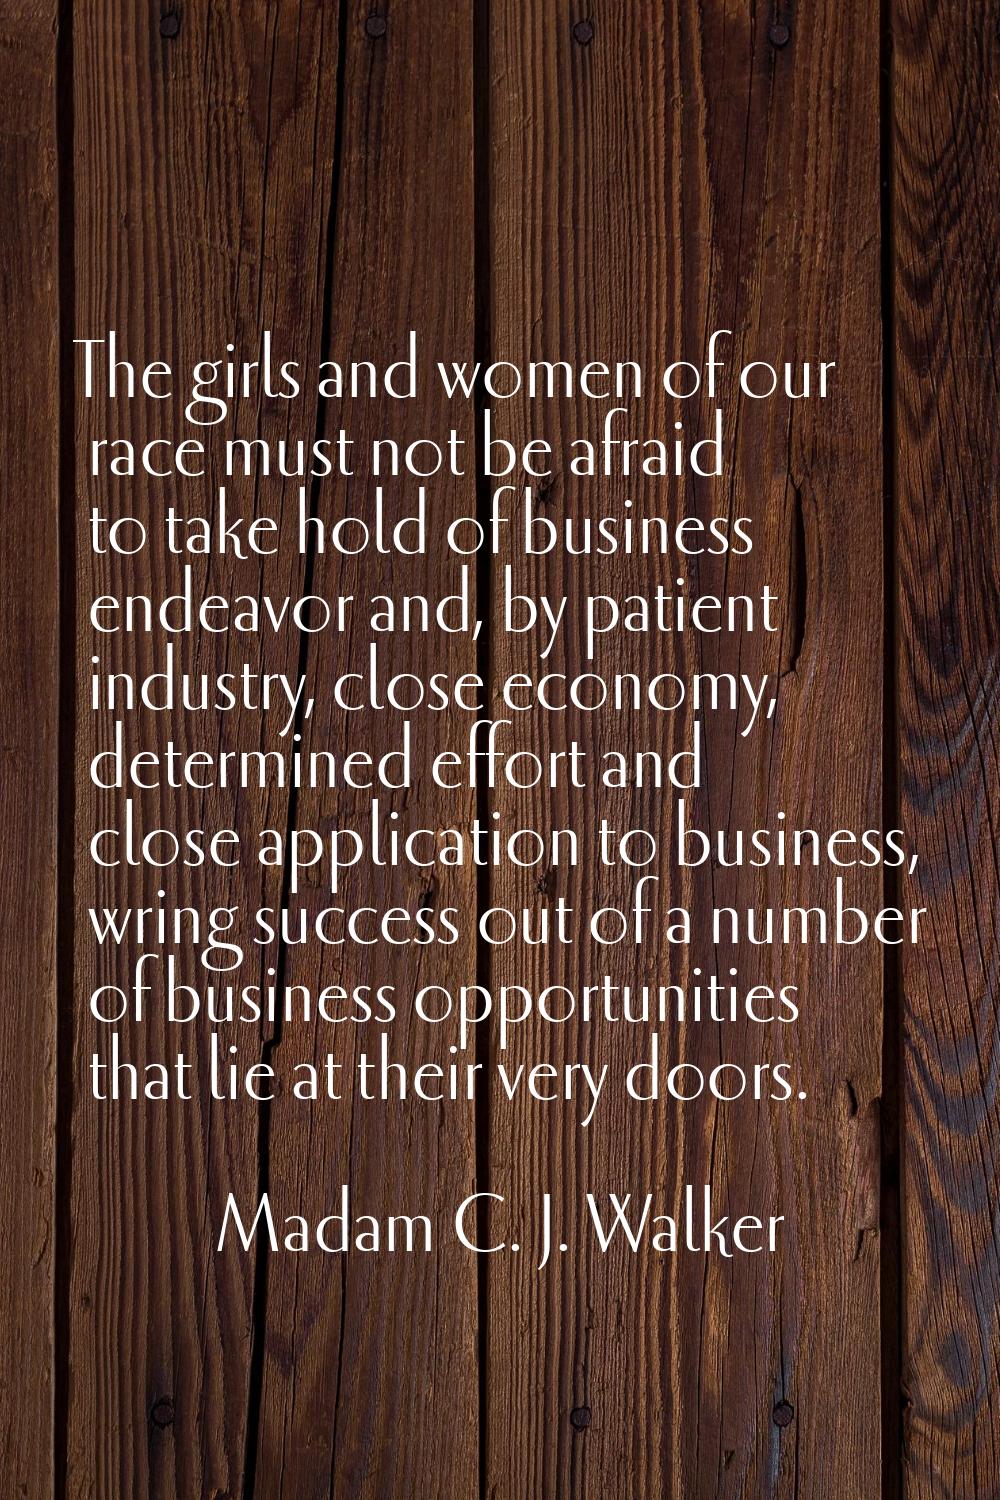 The girls and women of our race must not be afraid to take hold of business endeavor and, by patien